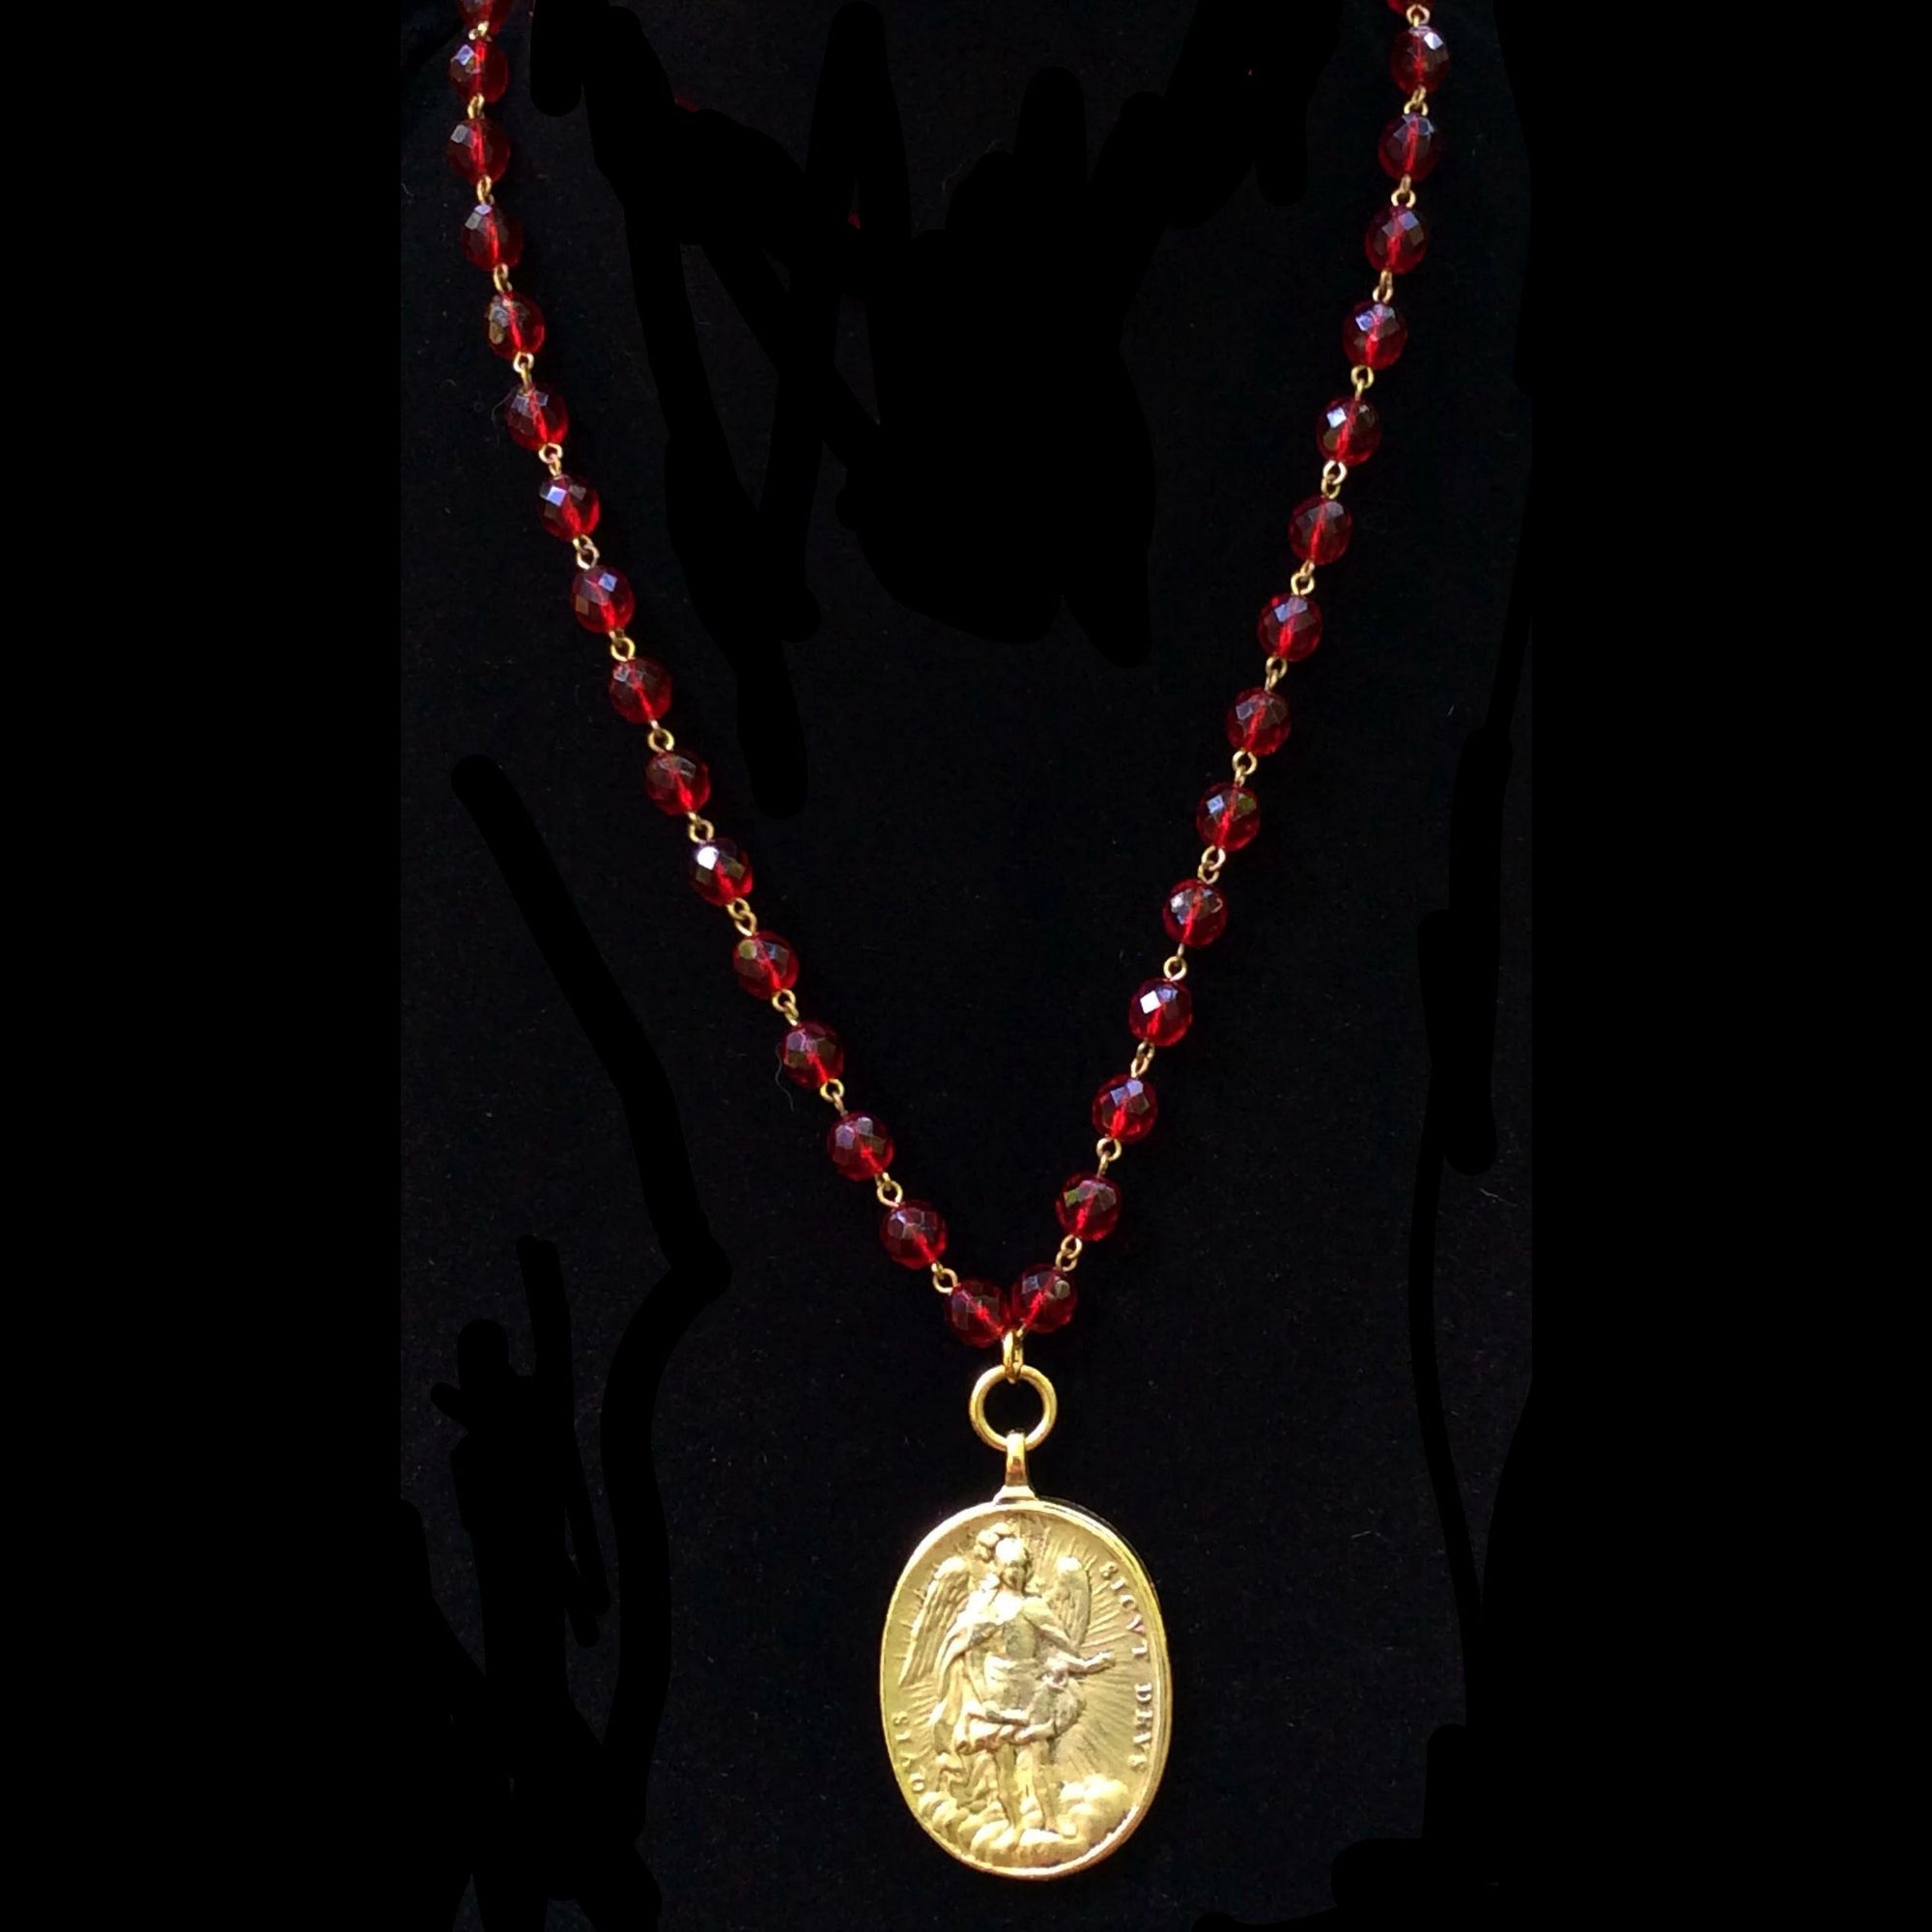 Cristo Rey Necklace with Our Lady of Guadalupe & Saint Michael in Garnet & Gold